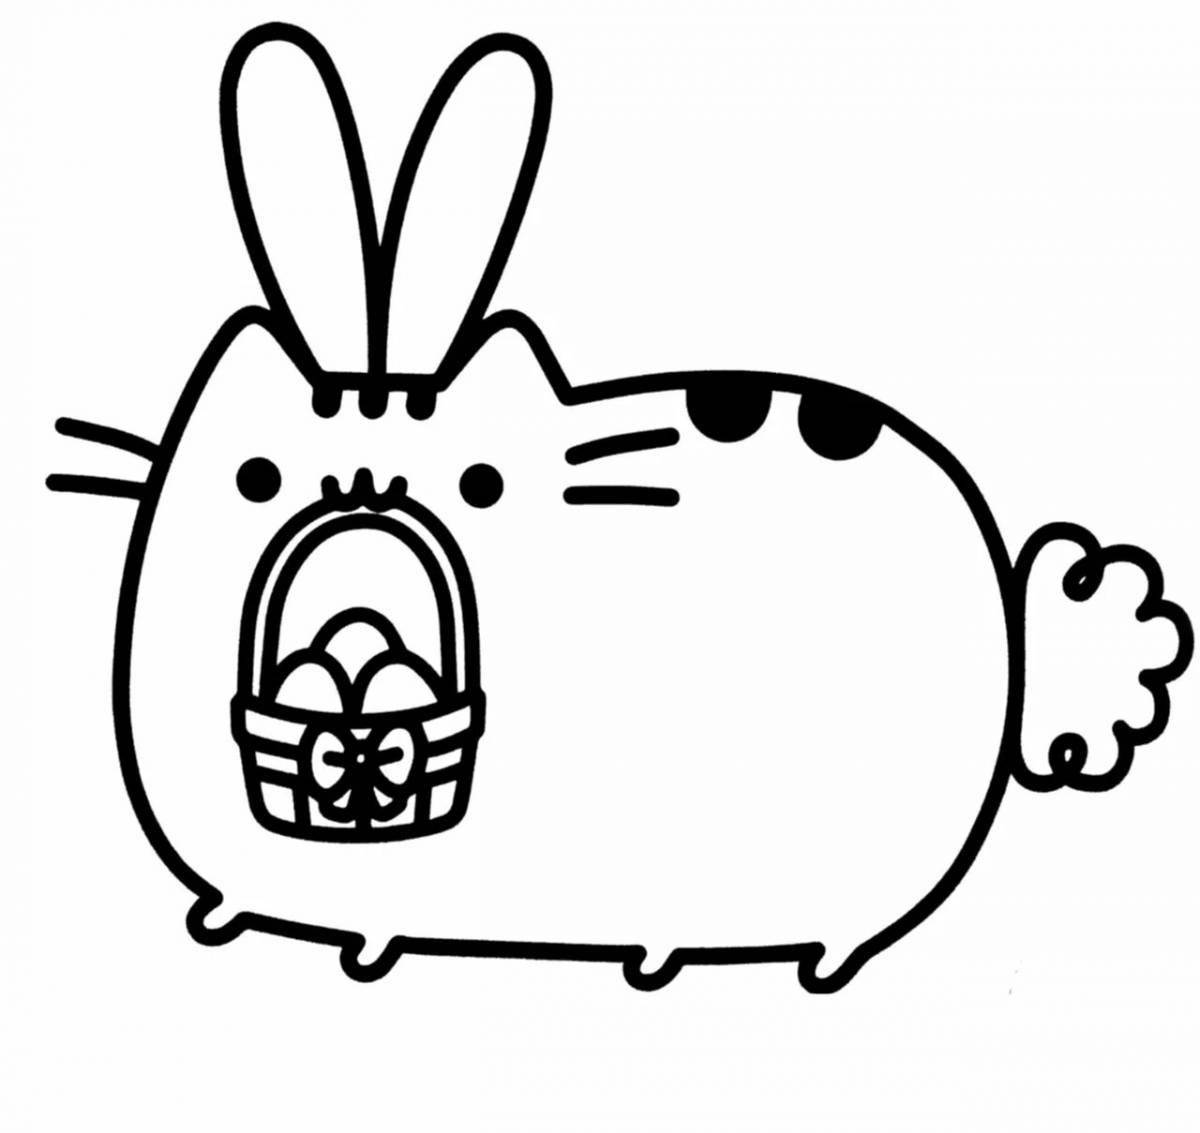 Awesome pusheen coloring page